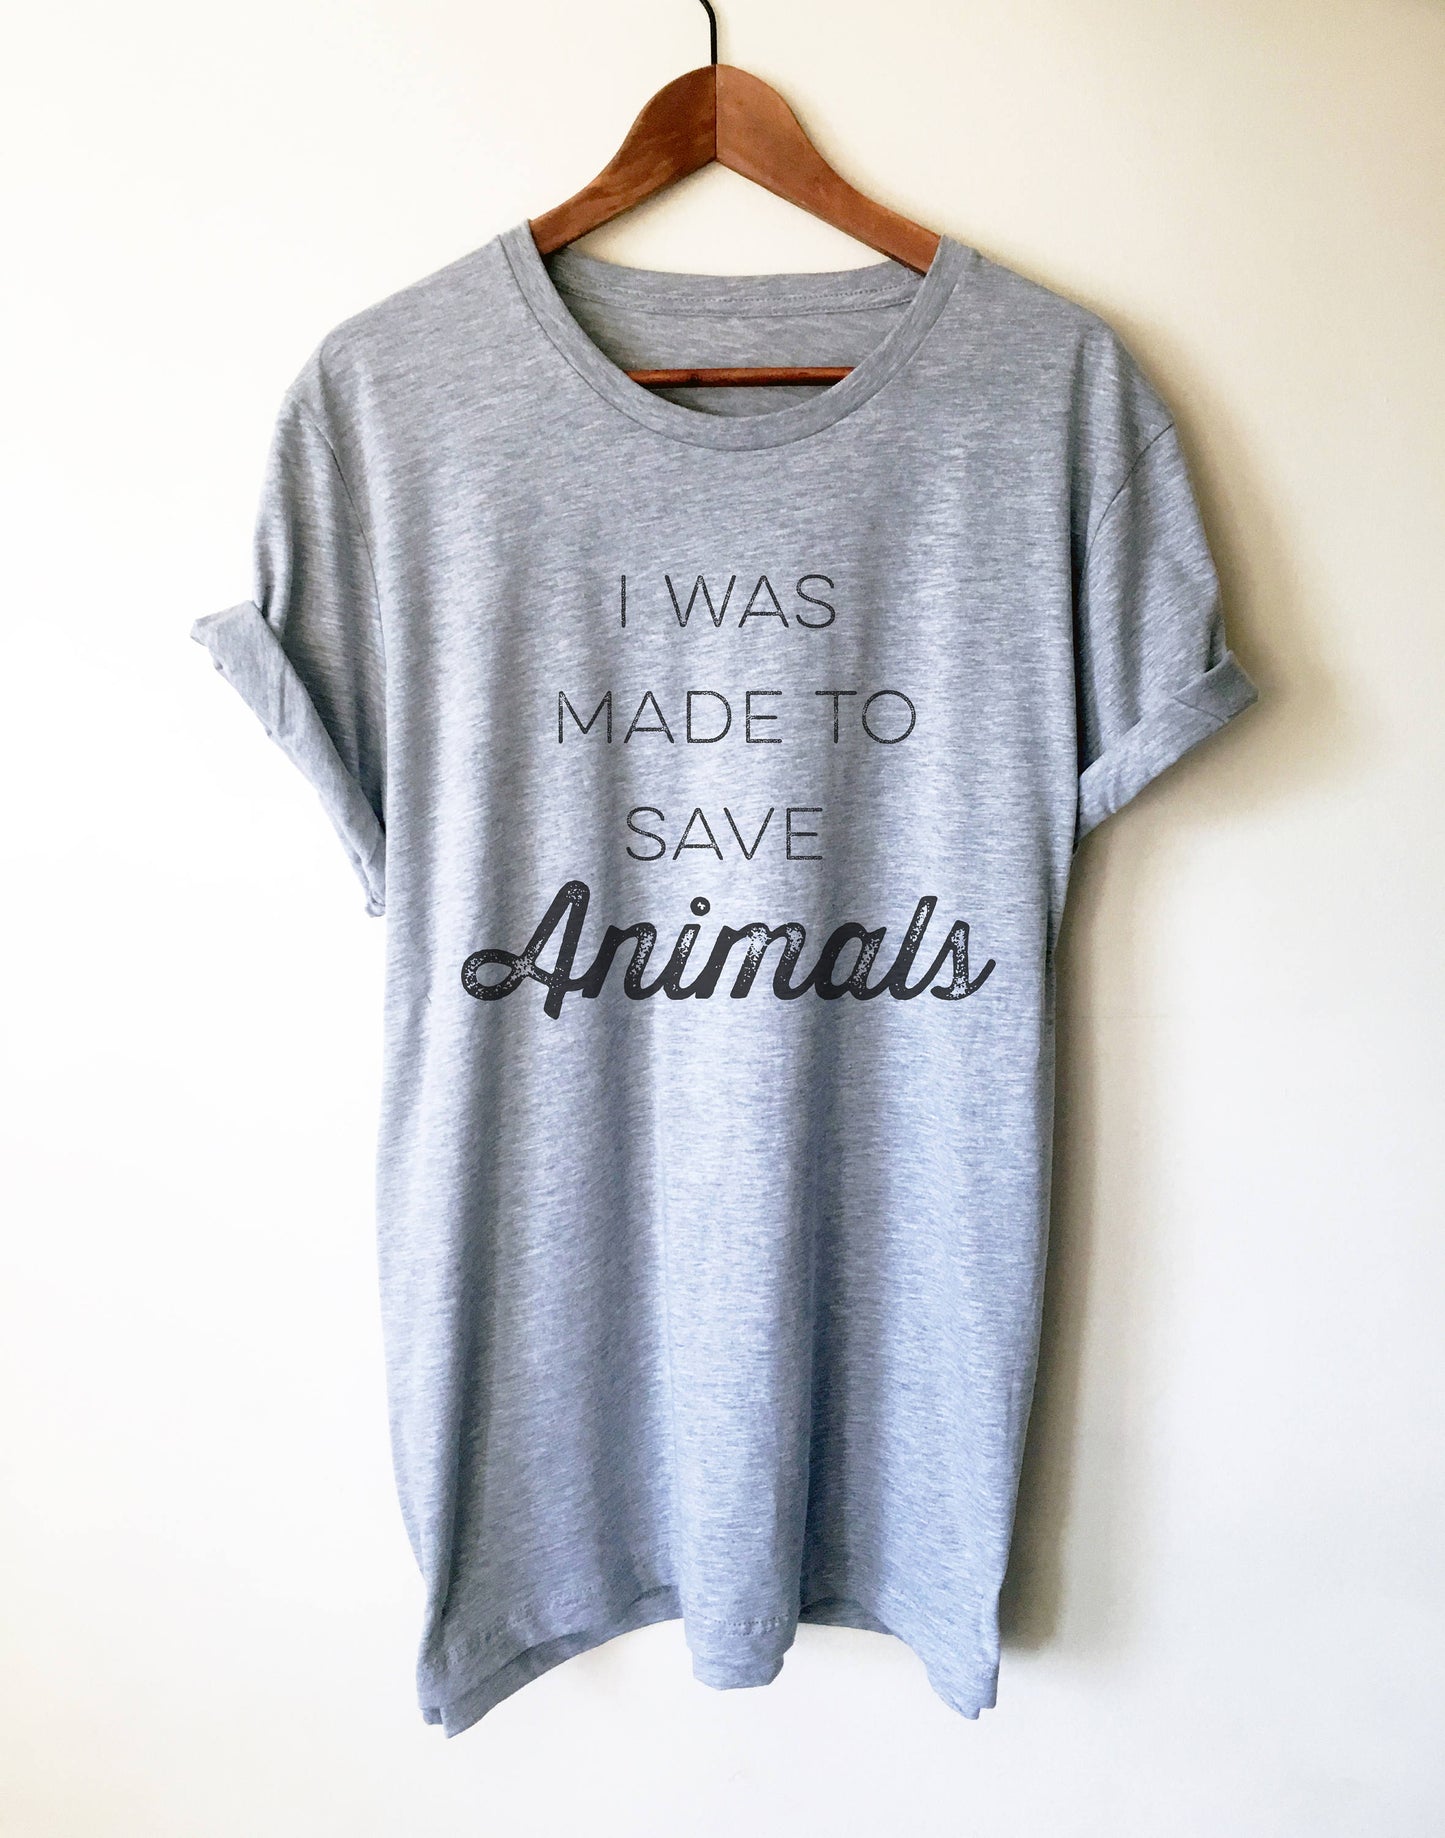 I Was Made To Save Animals Unisex